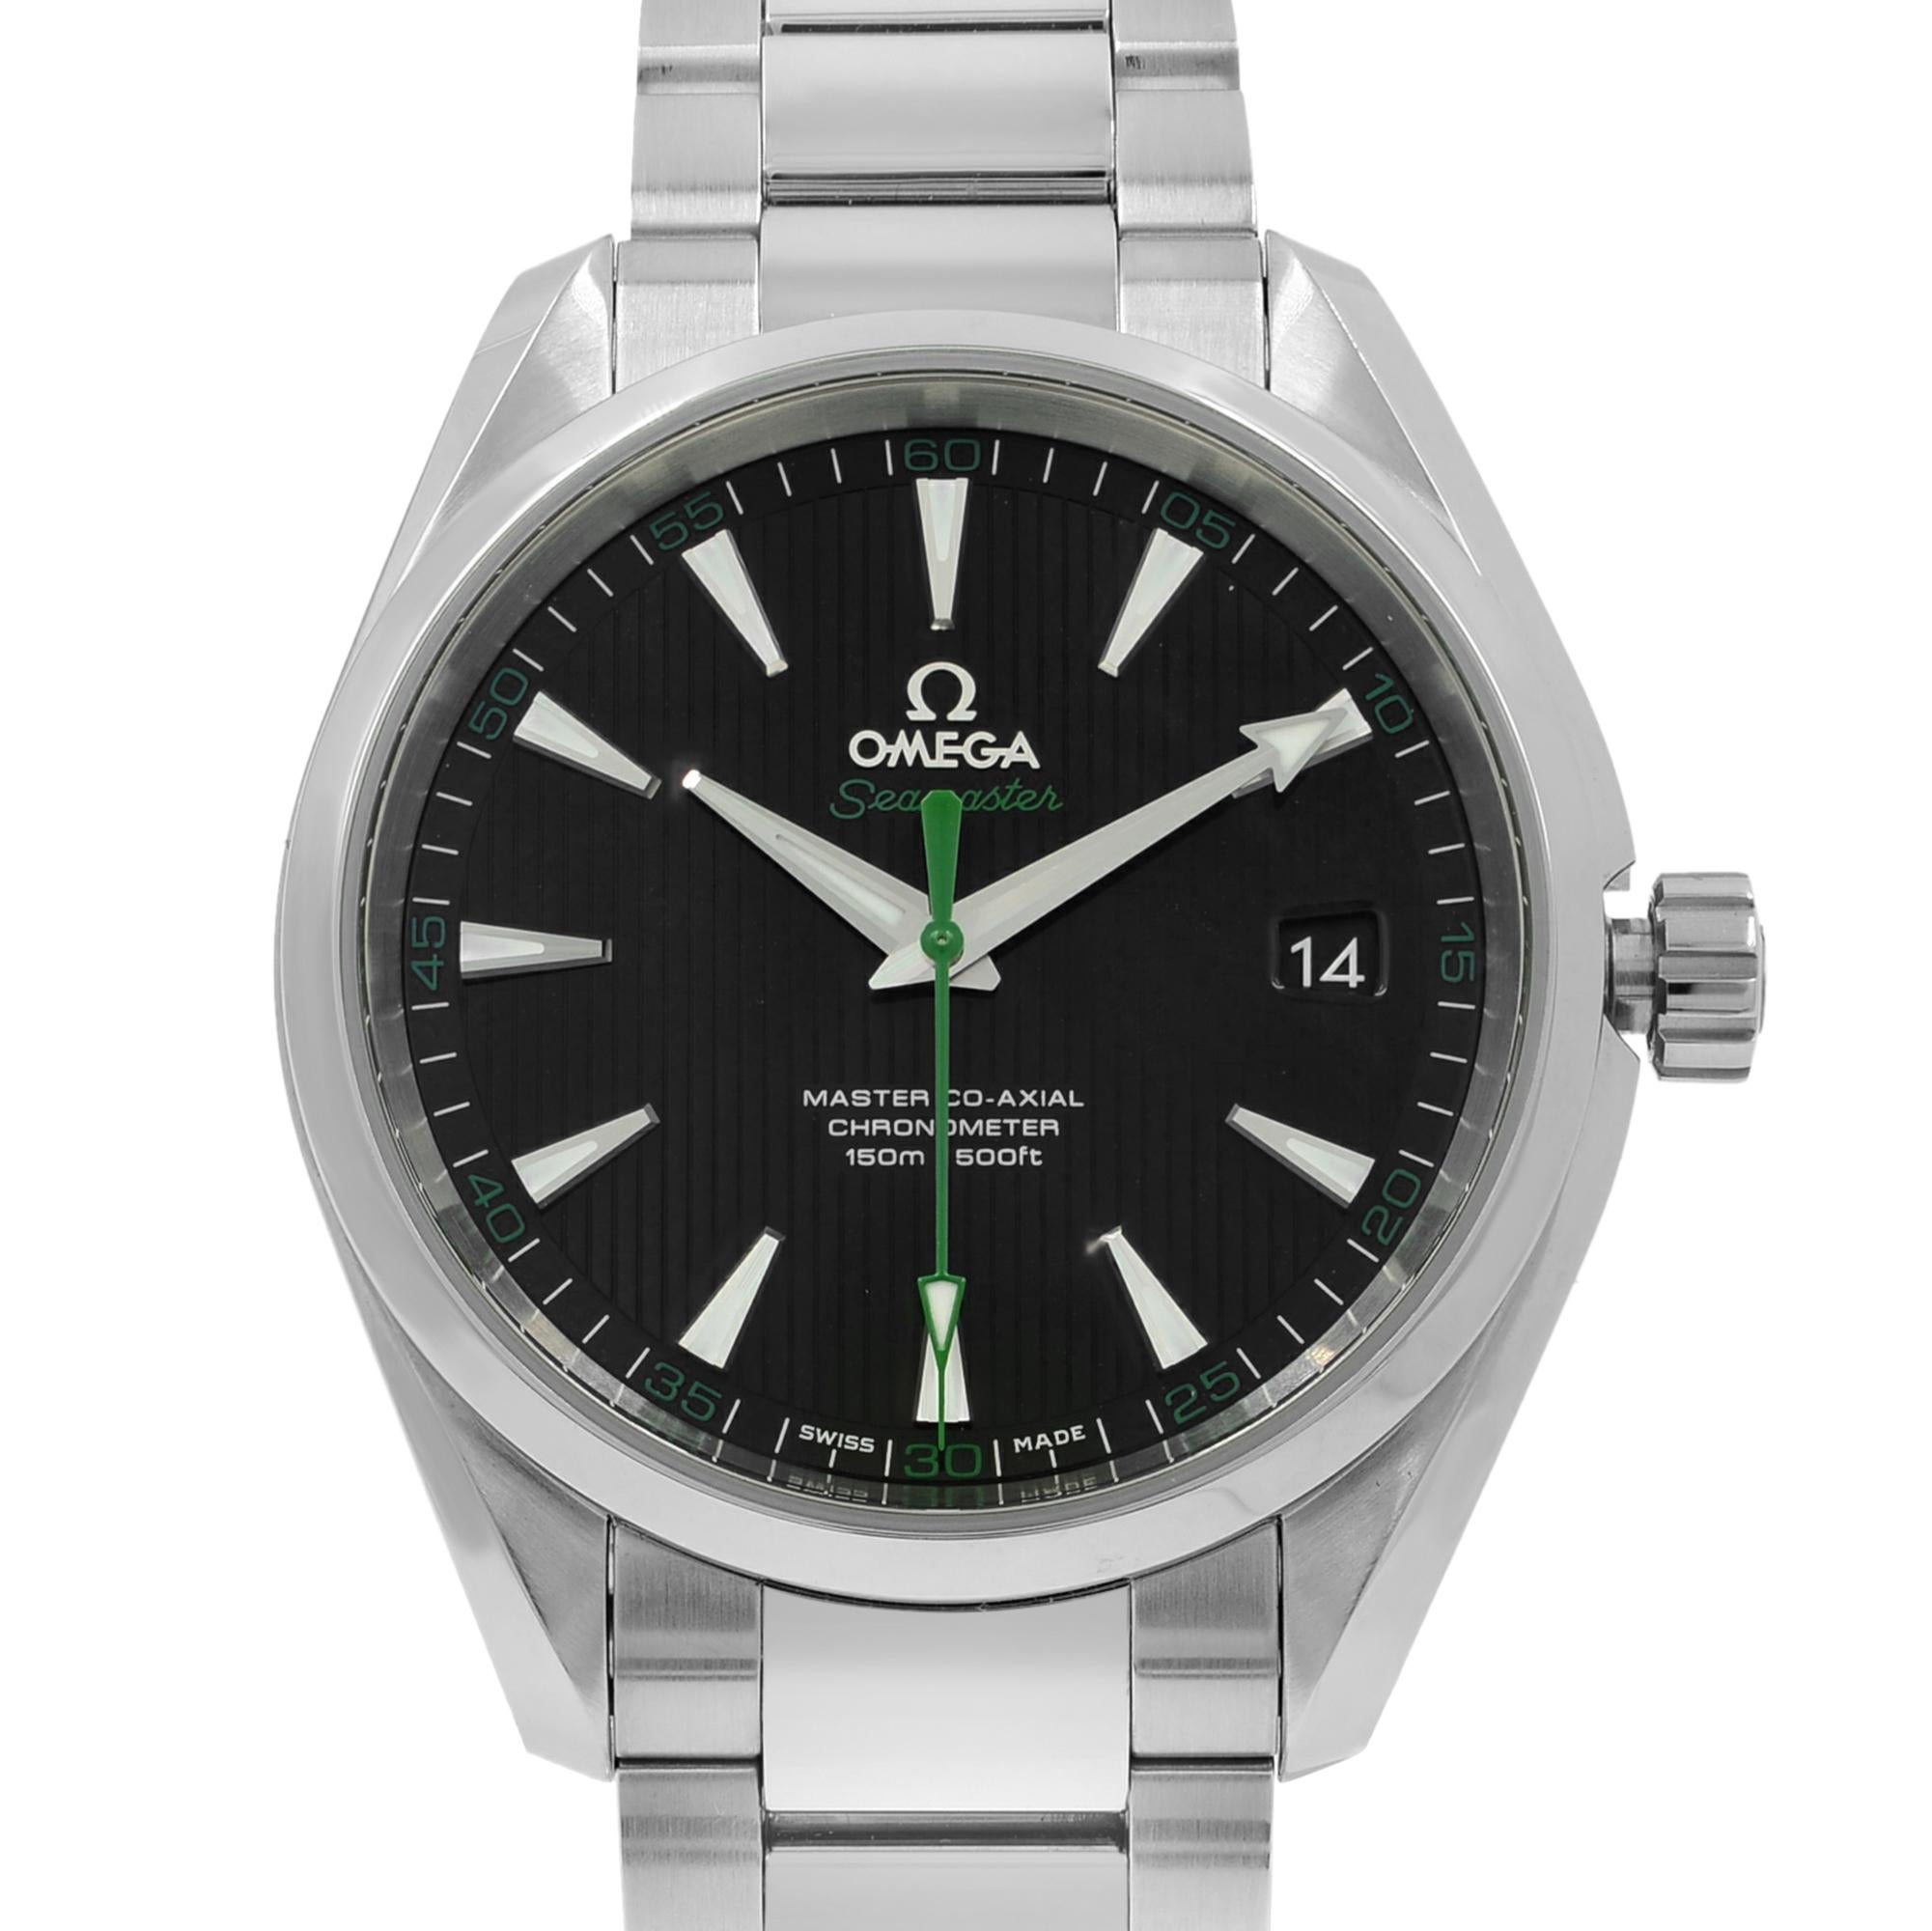 Small wrist Size fits only 6.75 Inches. Original Box and Papers are not included comes with a Chronostore presentation box and authenticity card.
Details:
Model Number
231.10.42.21.01.004
Brand
OMEGA
Department
Men
Style
Dress/Formal,